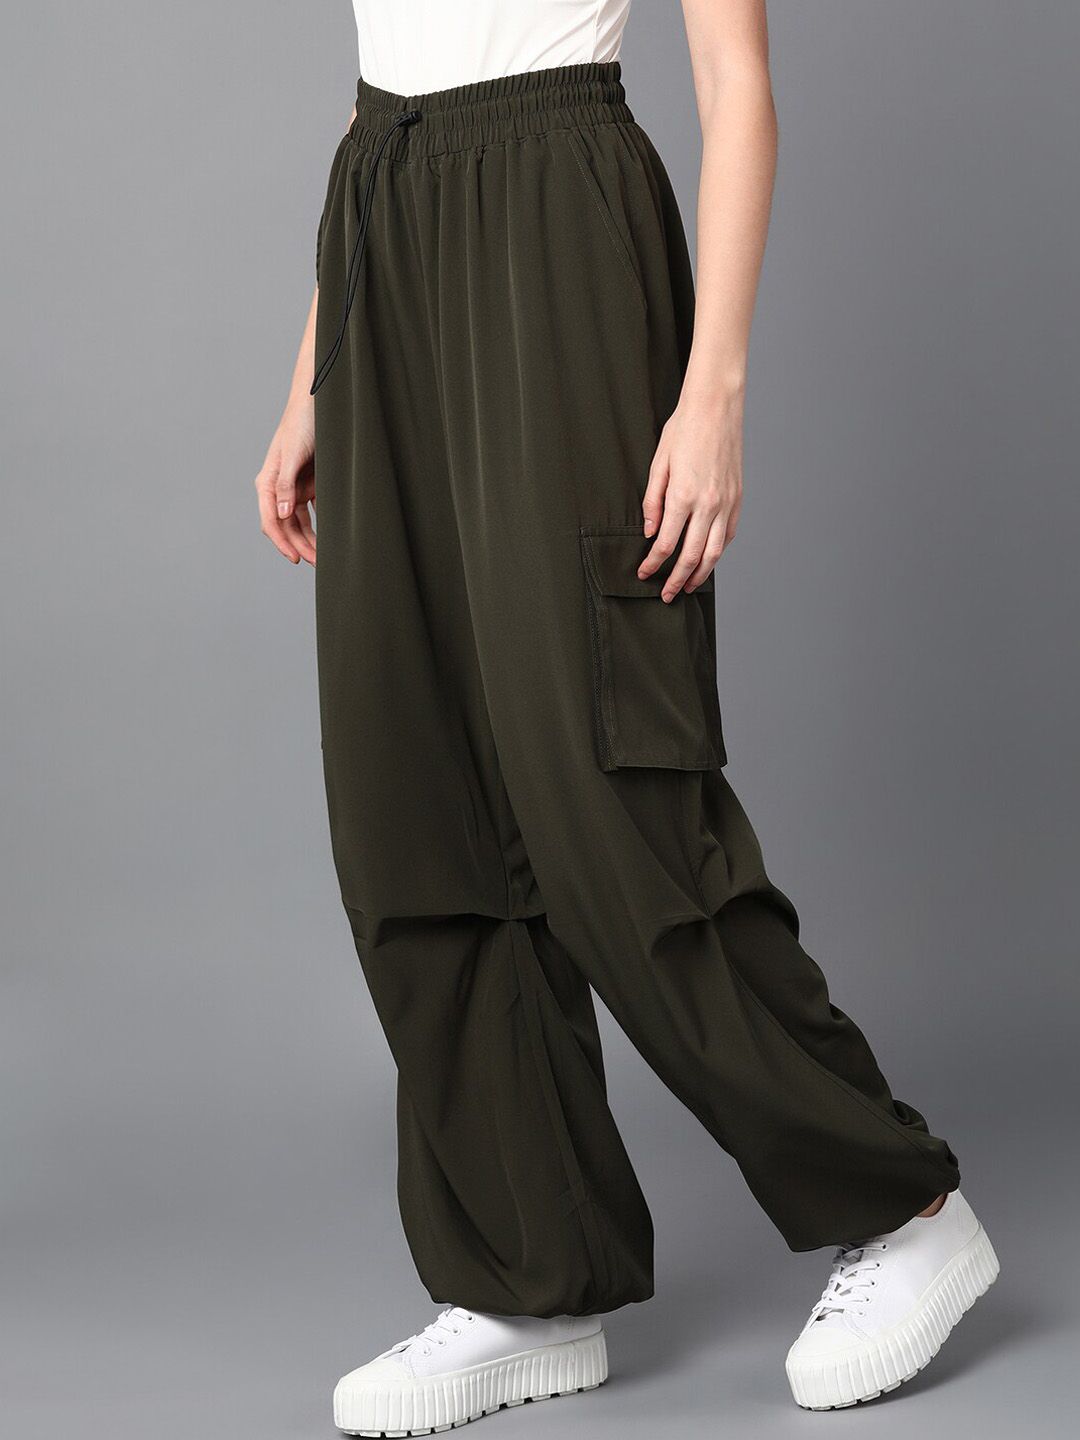 The Roadster Lifestyle Co. Women Solid Baggy Fit Parachute Trouser Price in India